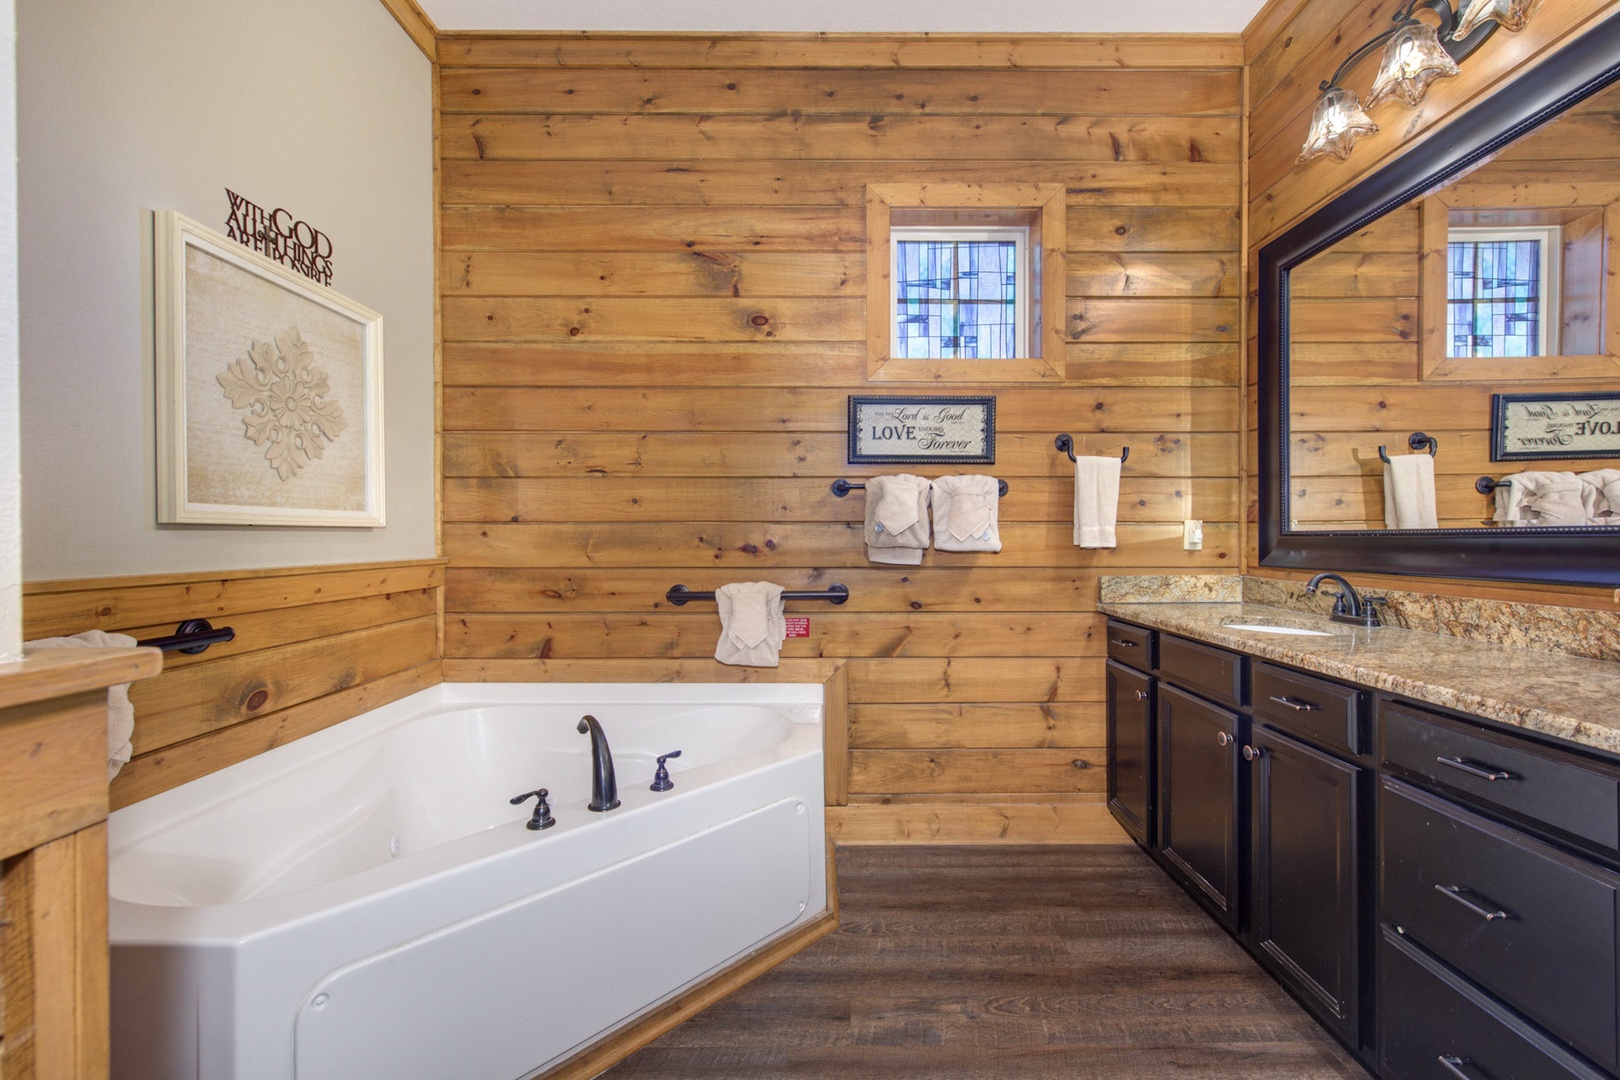 This ensuite offers an oversized vanity, shower, and luxurious soaking tub